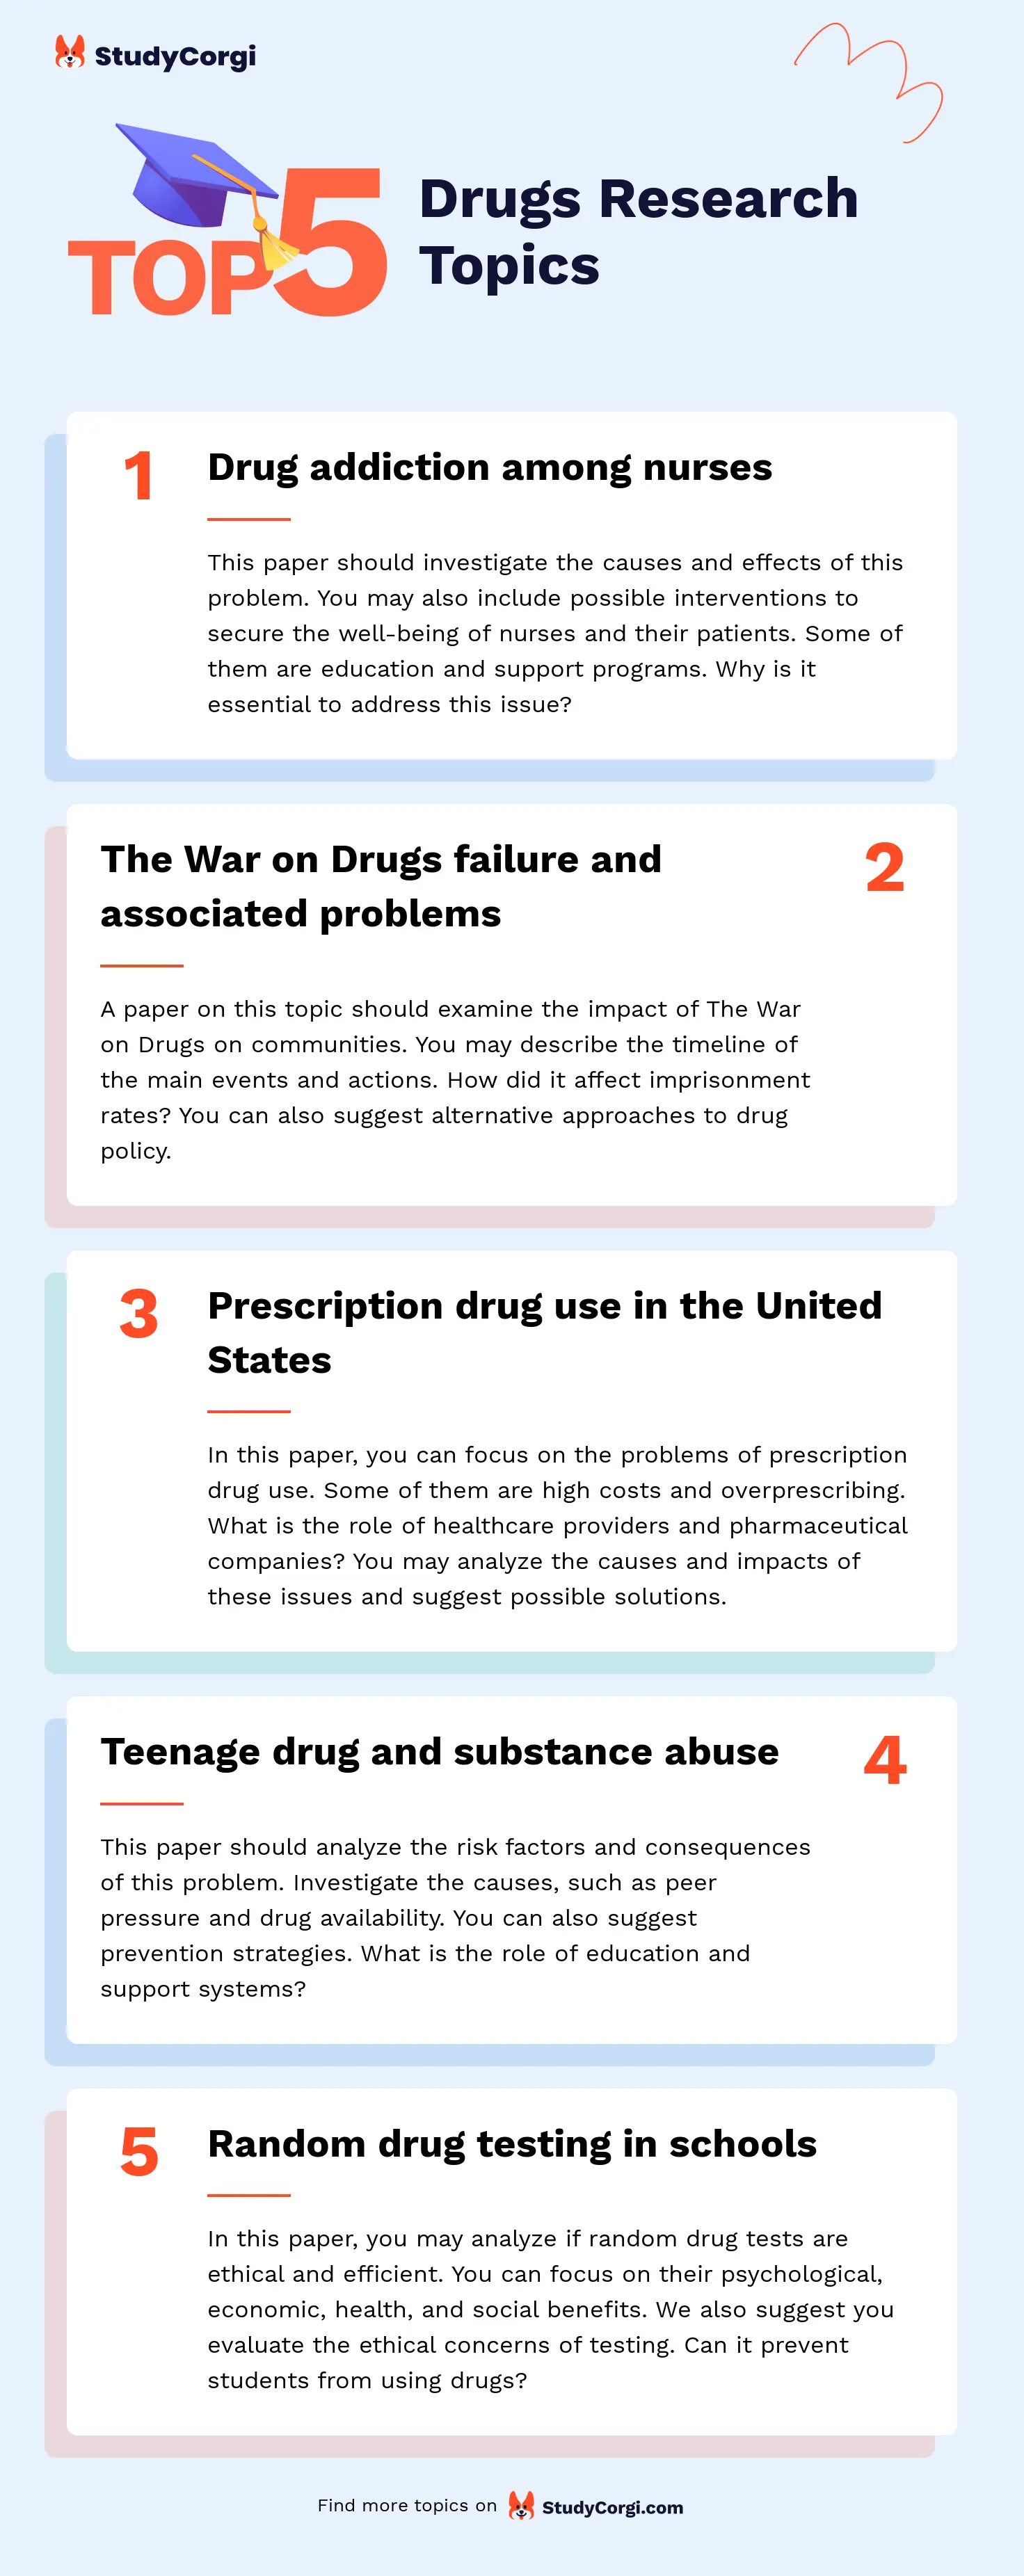 TOP-5 Drugs Research Topics